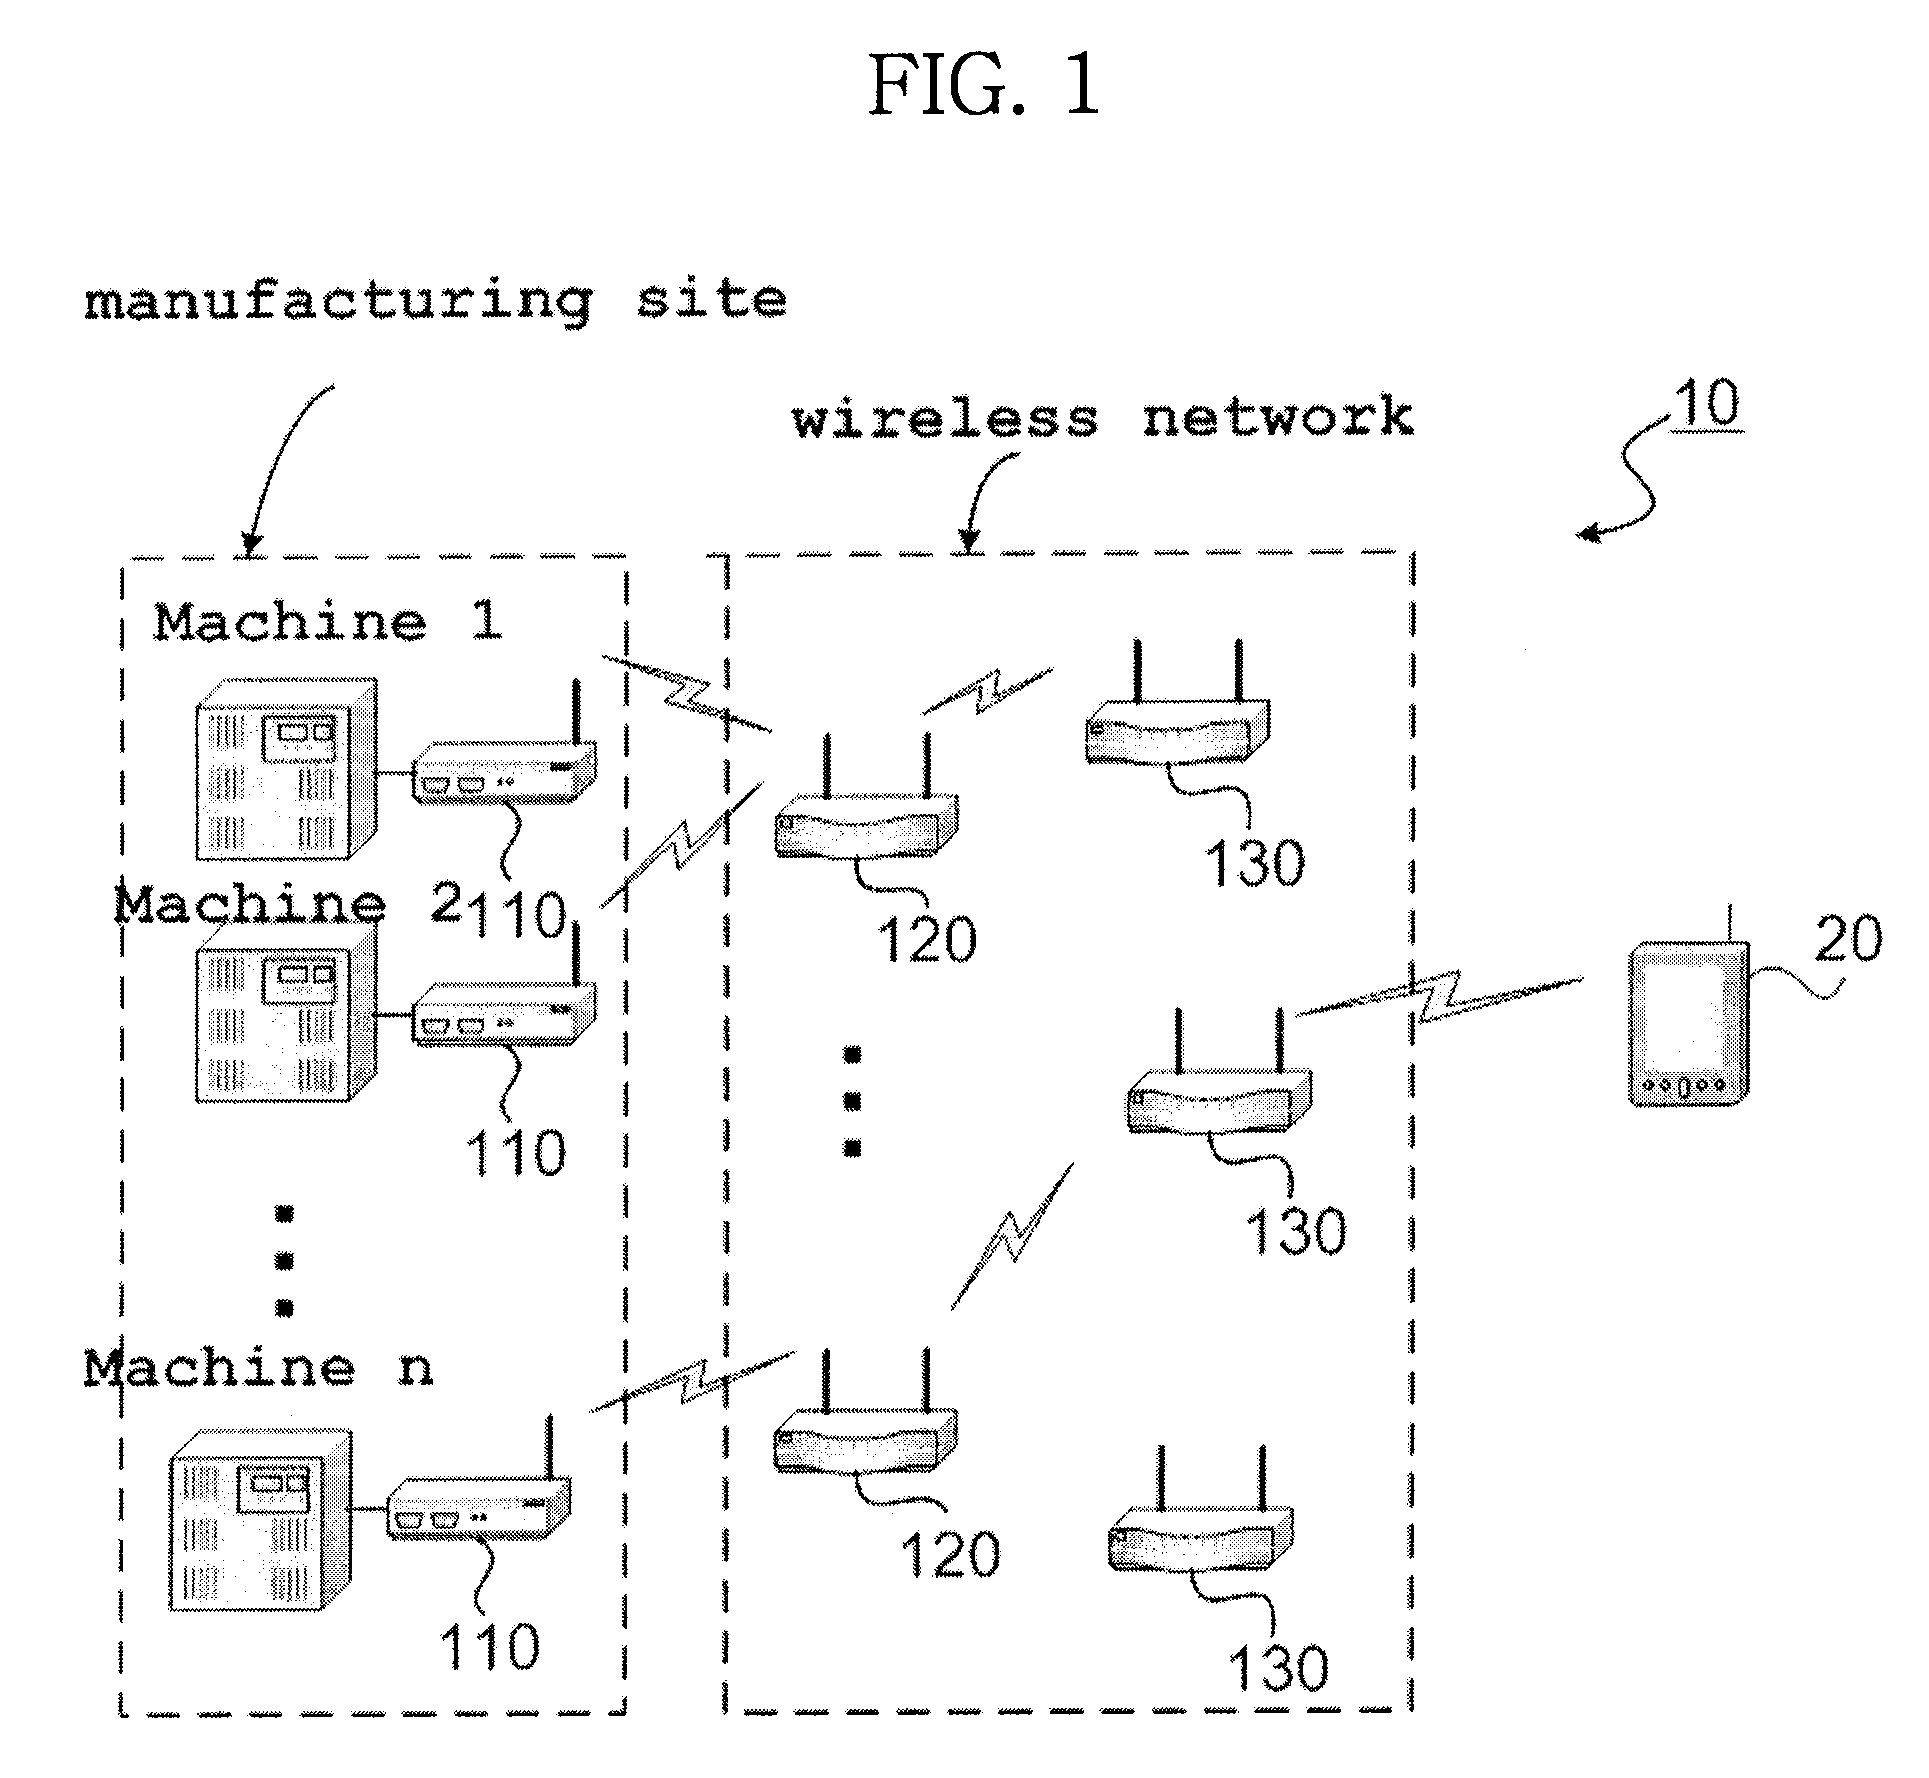 Wireless Signal Light System Based on Wireless Network and Portable Signal Light